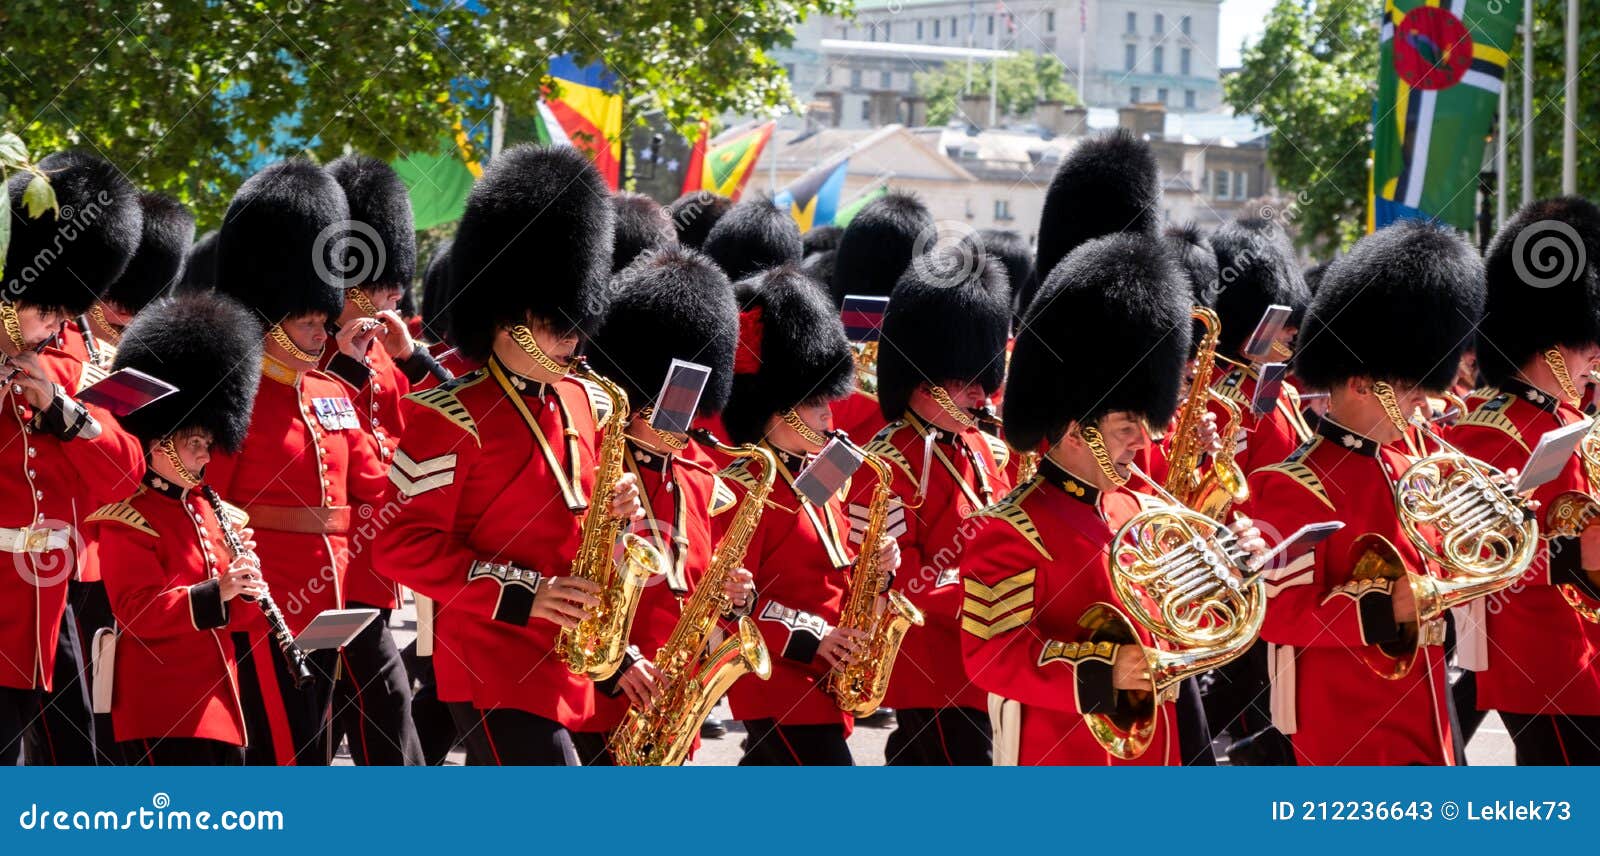 trooping the colour military band, photographed in london, uk. guards wear red and black traditional uniform with bearskin hats.